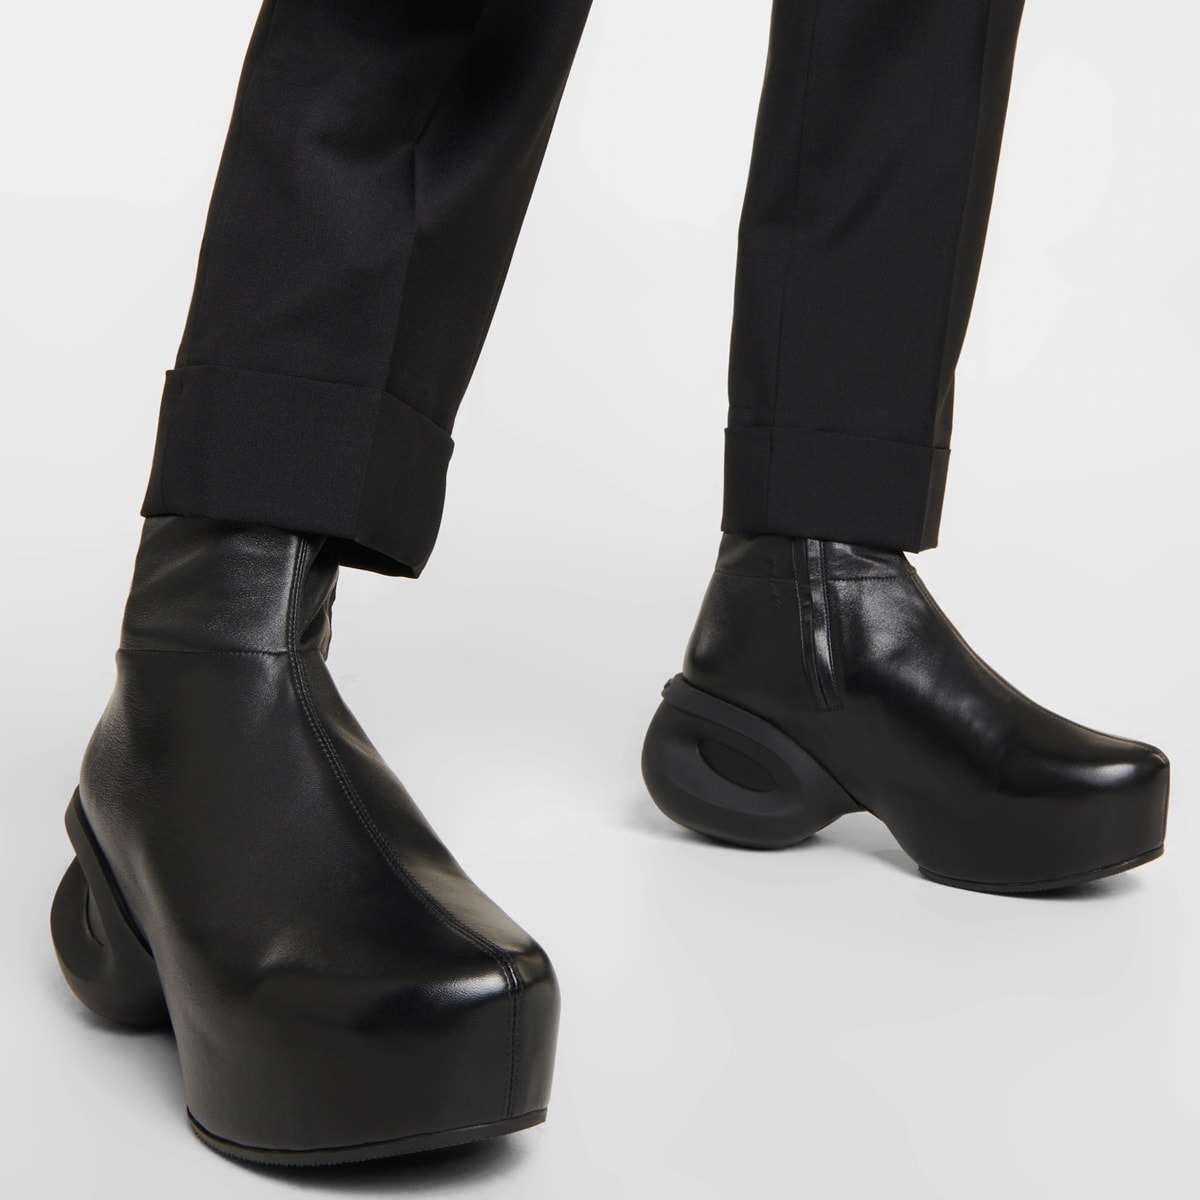 Givenchy masterfully balances style and comfort with these edgy Black G-Clog boots